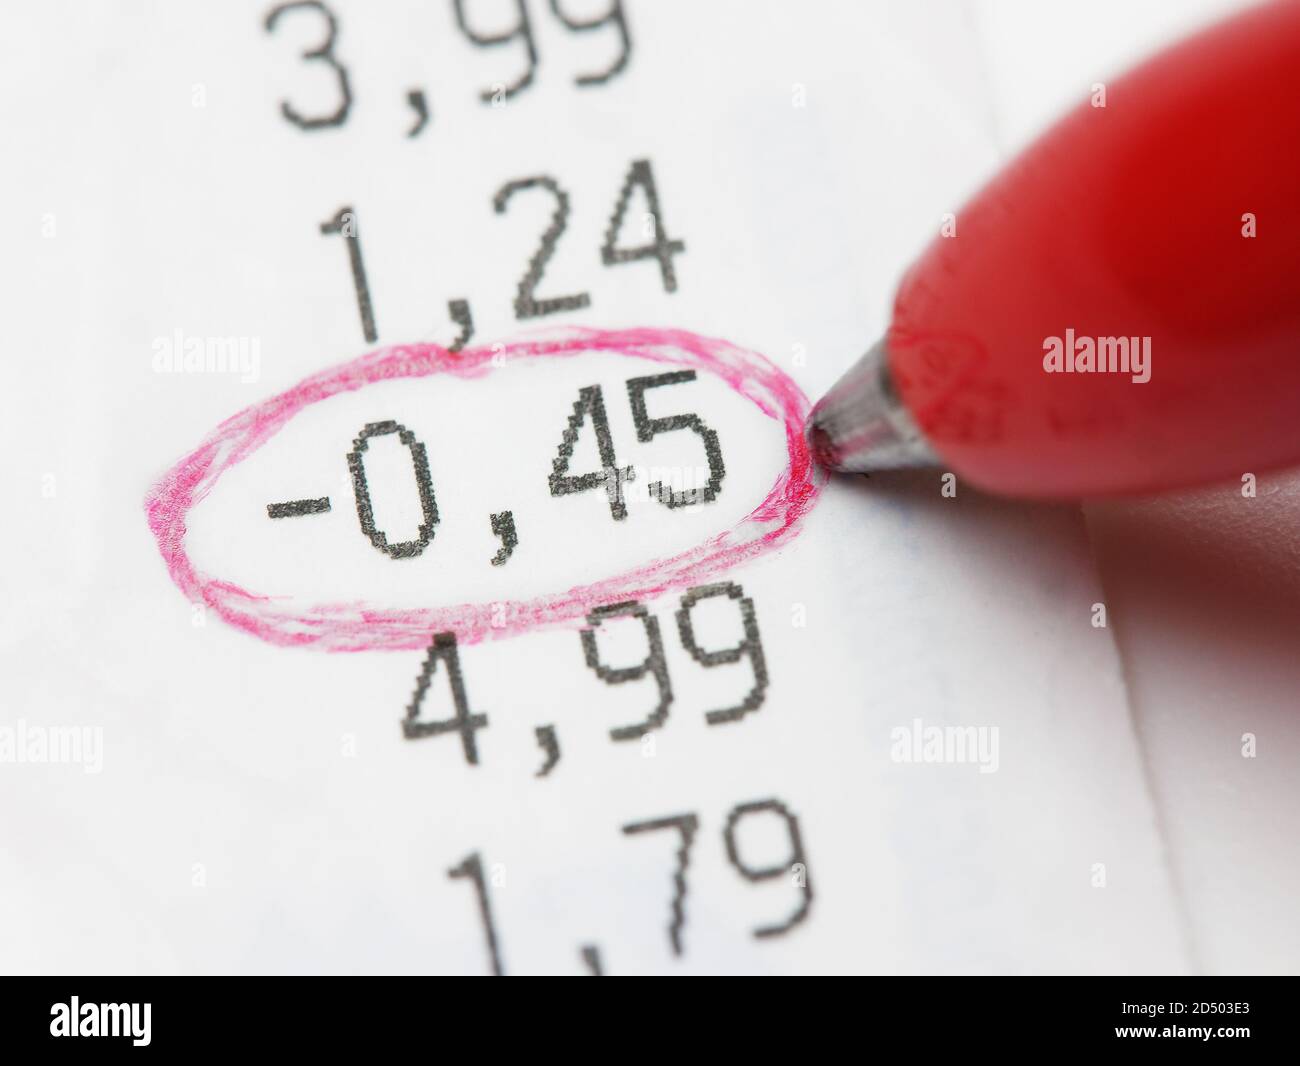 Closeup red pen encircle negative number on bill or receipt Stock Photo